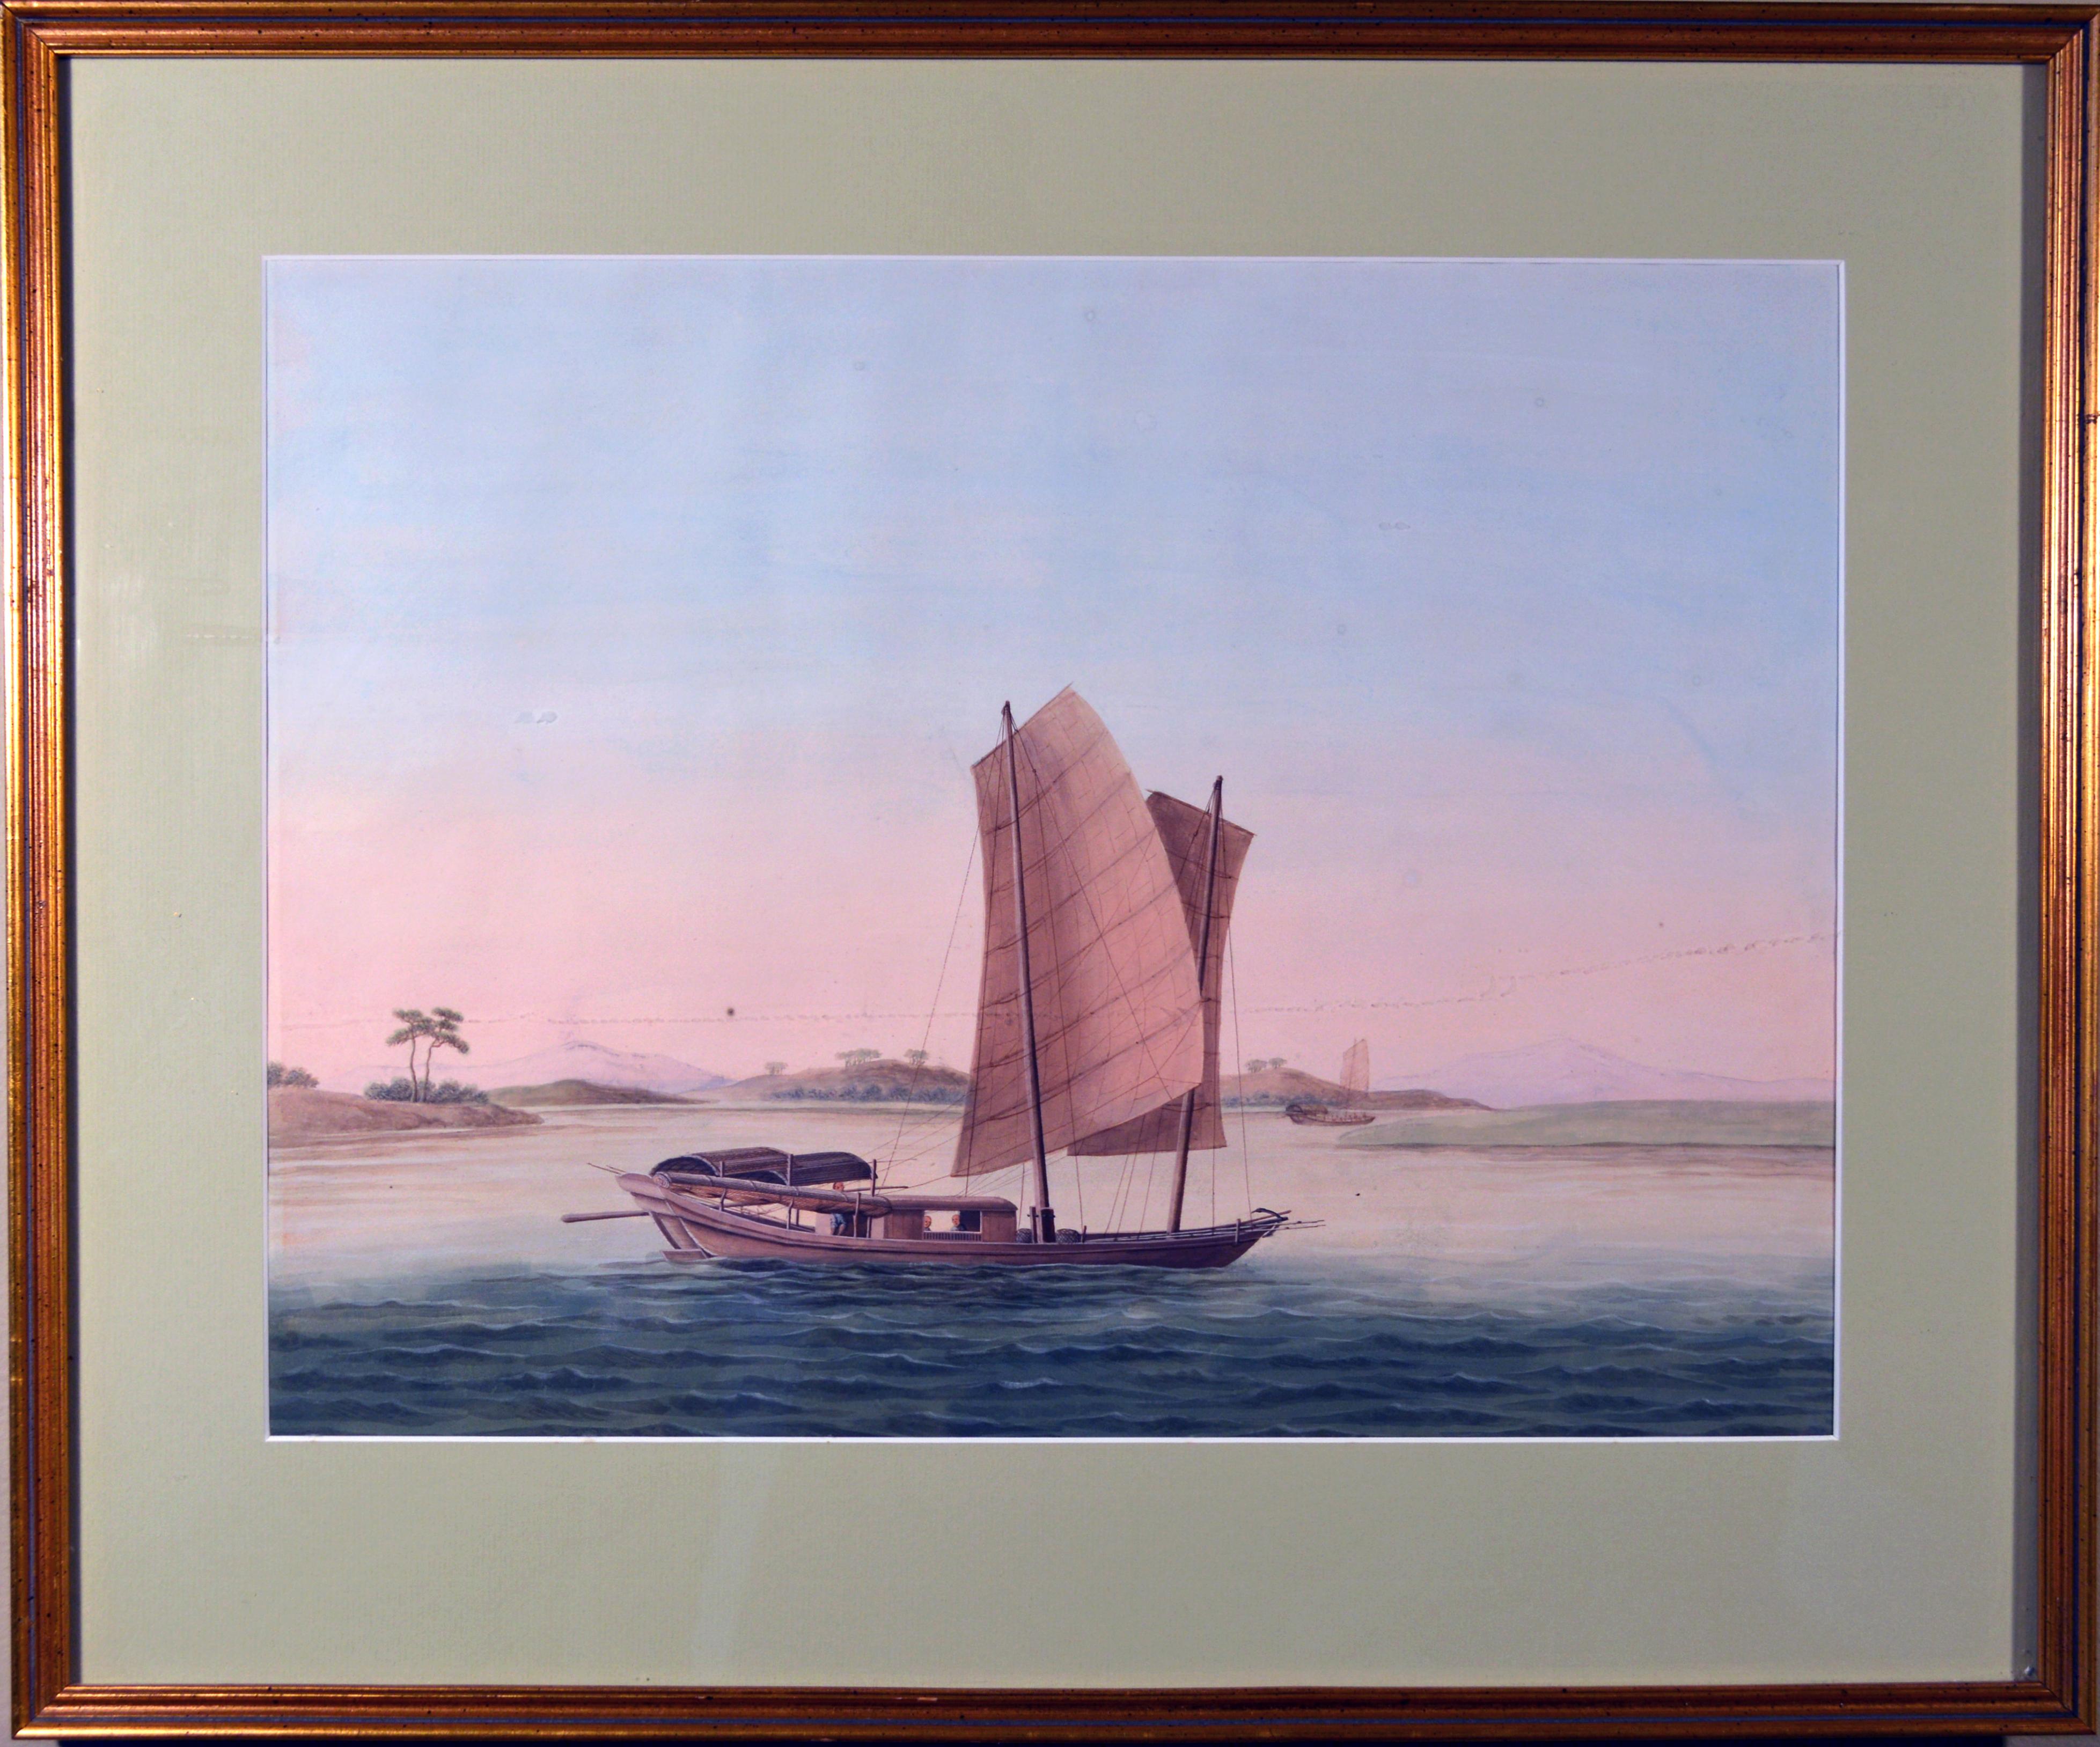 The large Chinese watercolor on European paper depicts a starboard view of a two-master sailing ship with one man sailing the vessel while two passengers can clearly be seen inside through the open window.

 Another vessel can be seen in the